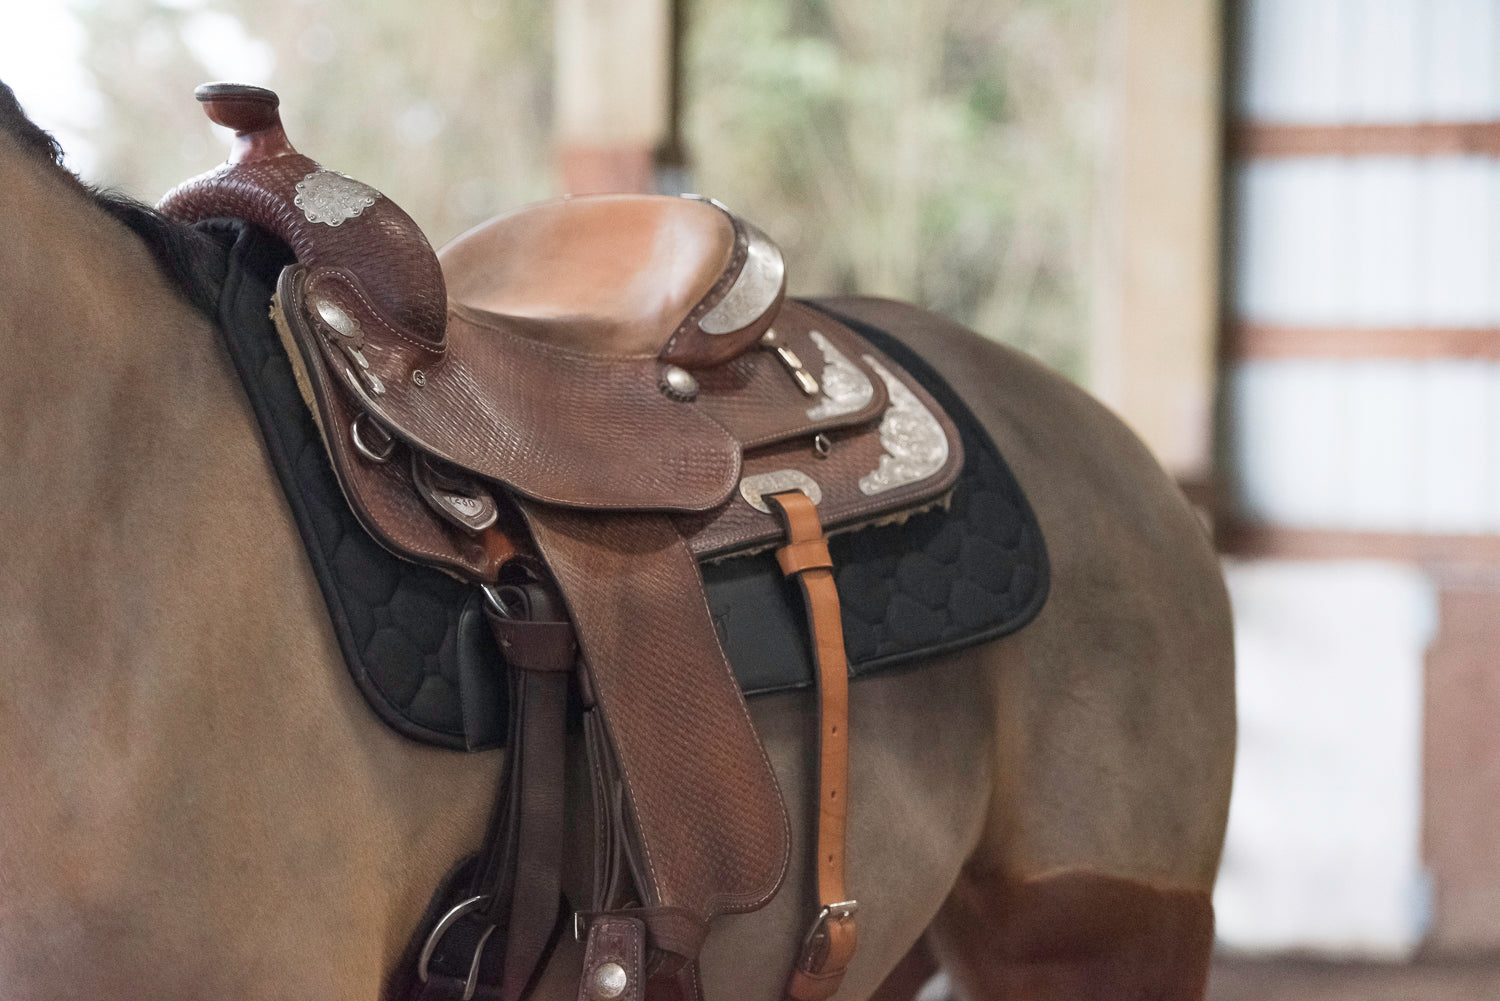 Therapeutic Horse Padded Shoulder Guard